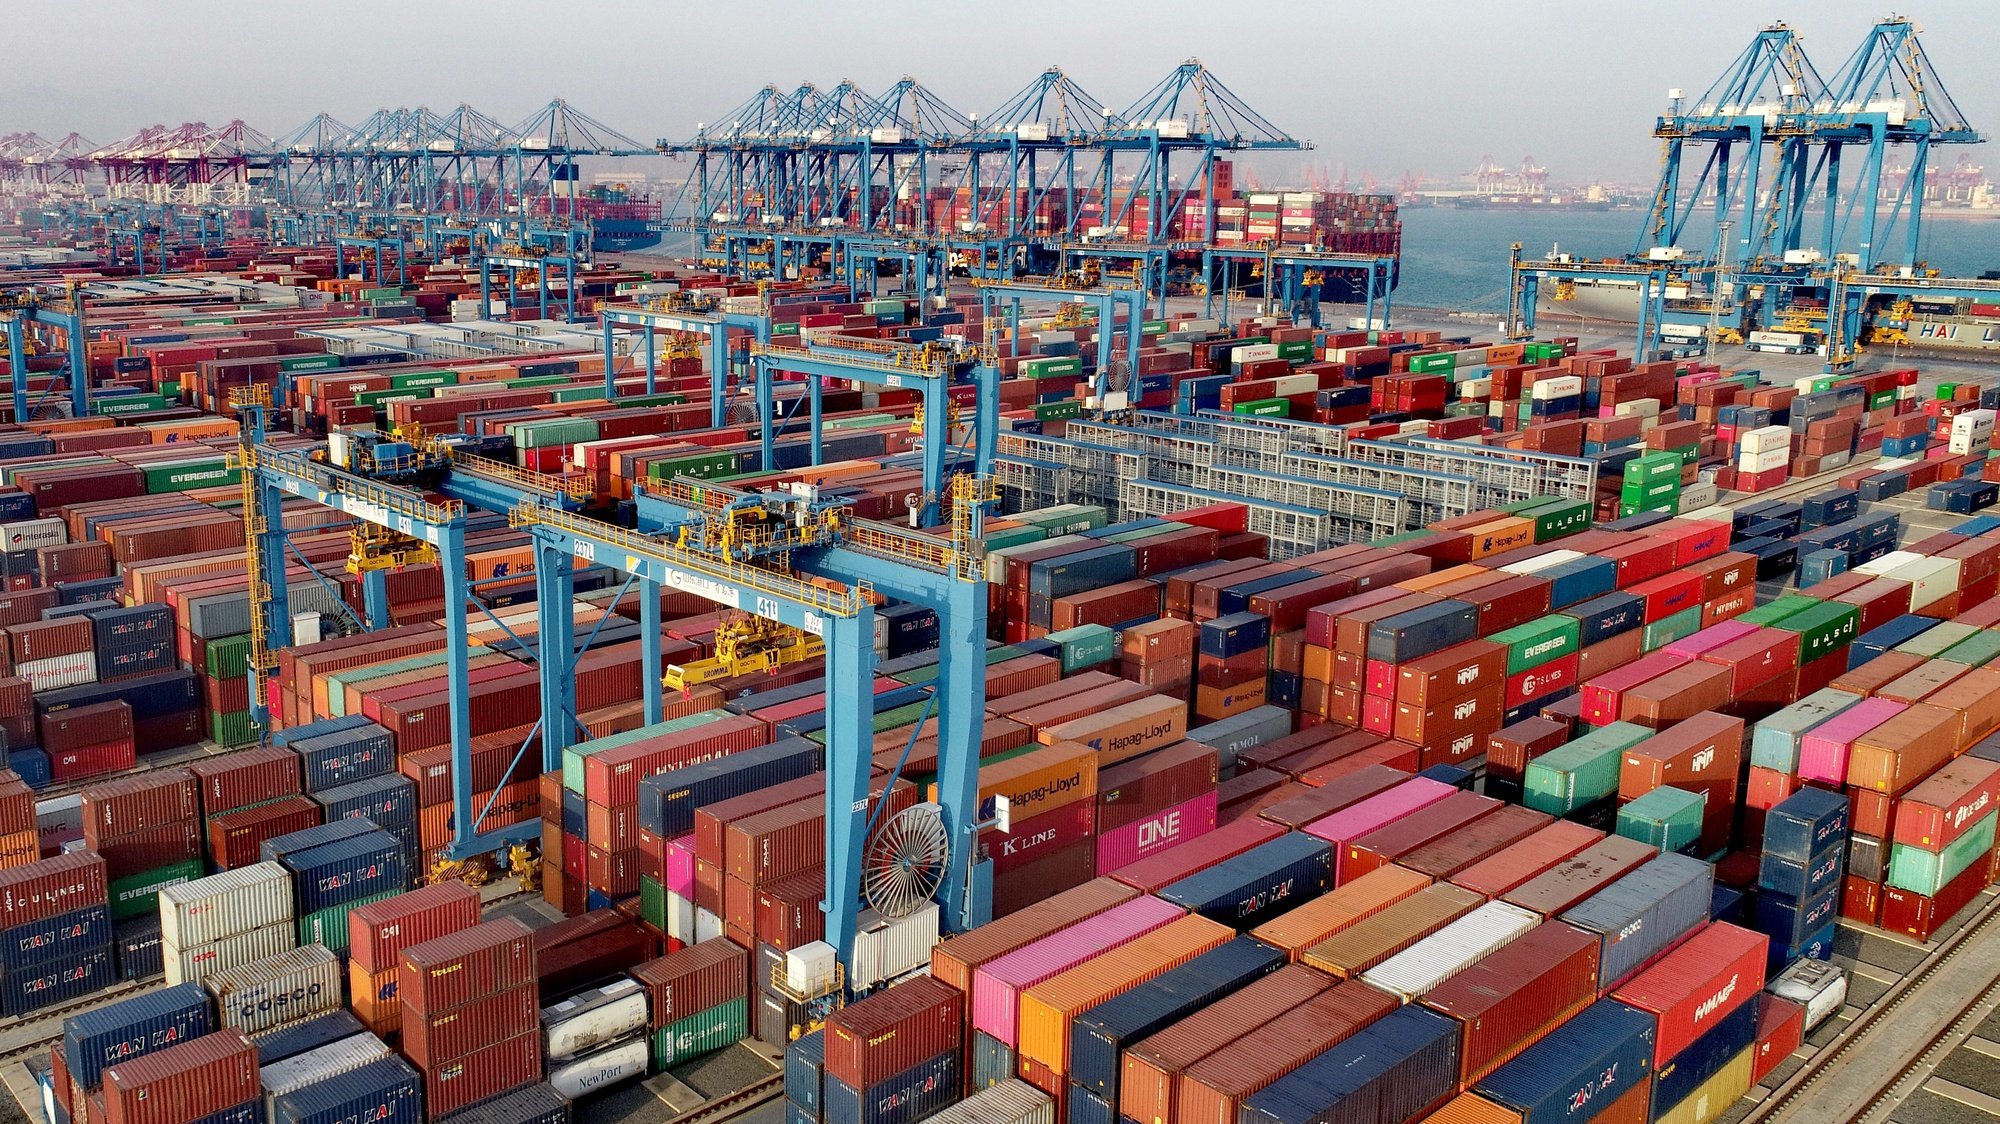 epa08867889 A view of a busy container port in Qingdao, Shandong province, China, 01 December 2020 (issued 07 December 2020). China&#039;s exports in November jumped by 21.1 percent by US dollar value from a year earlier, with exports to the United States rose 46 percent to make a record 75.4 billion US dollar trade surplus with the US.  EPA/ZHANG JINGANG CHINA OUT